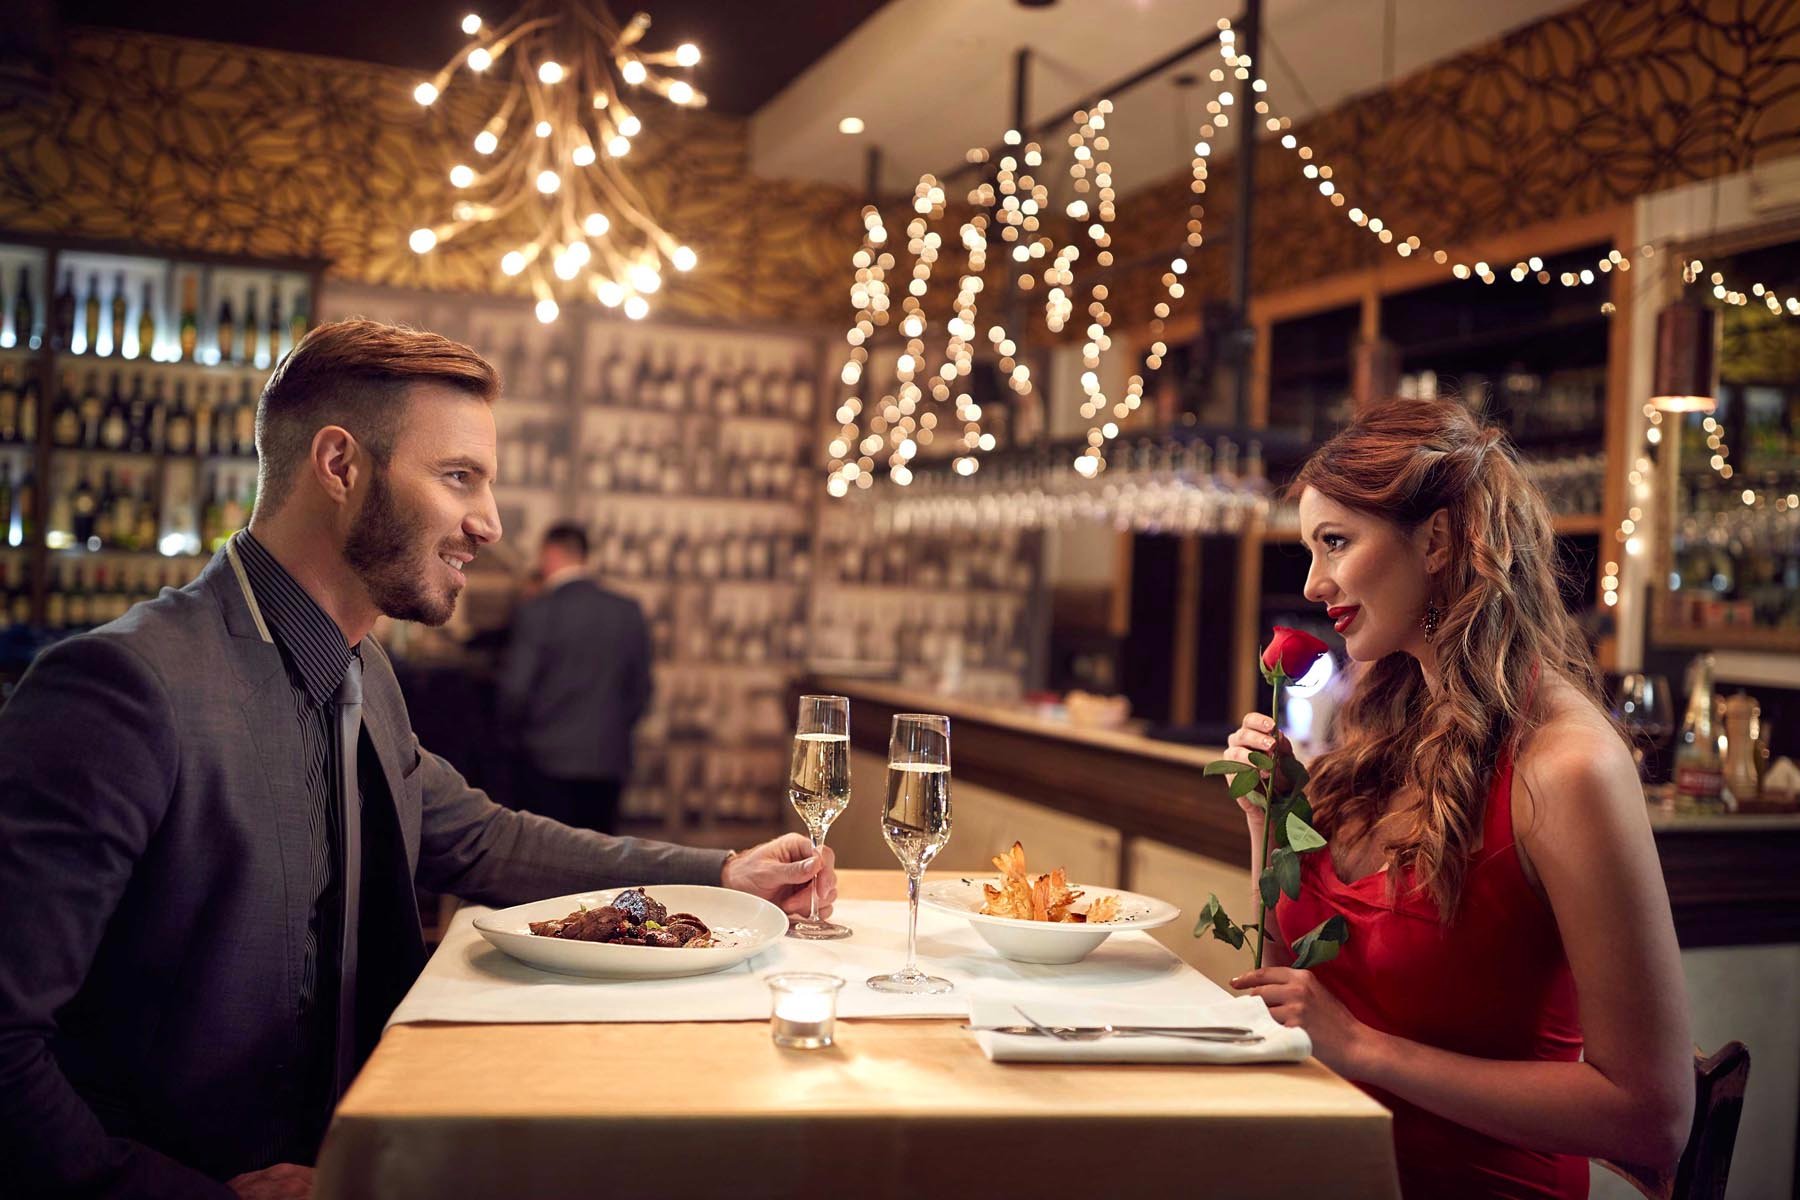 Show Some Love For NYC Restaurants on Valentine’s Day